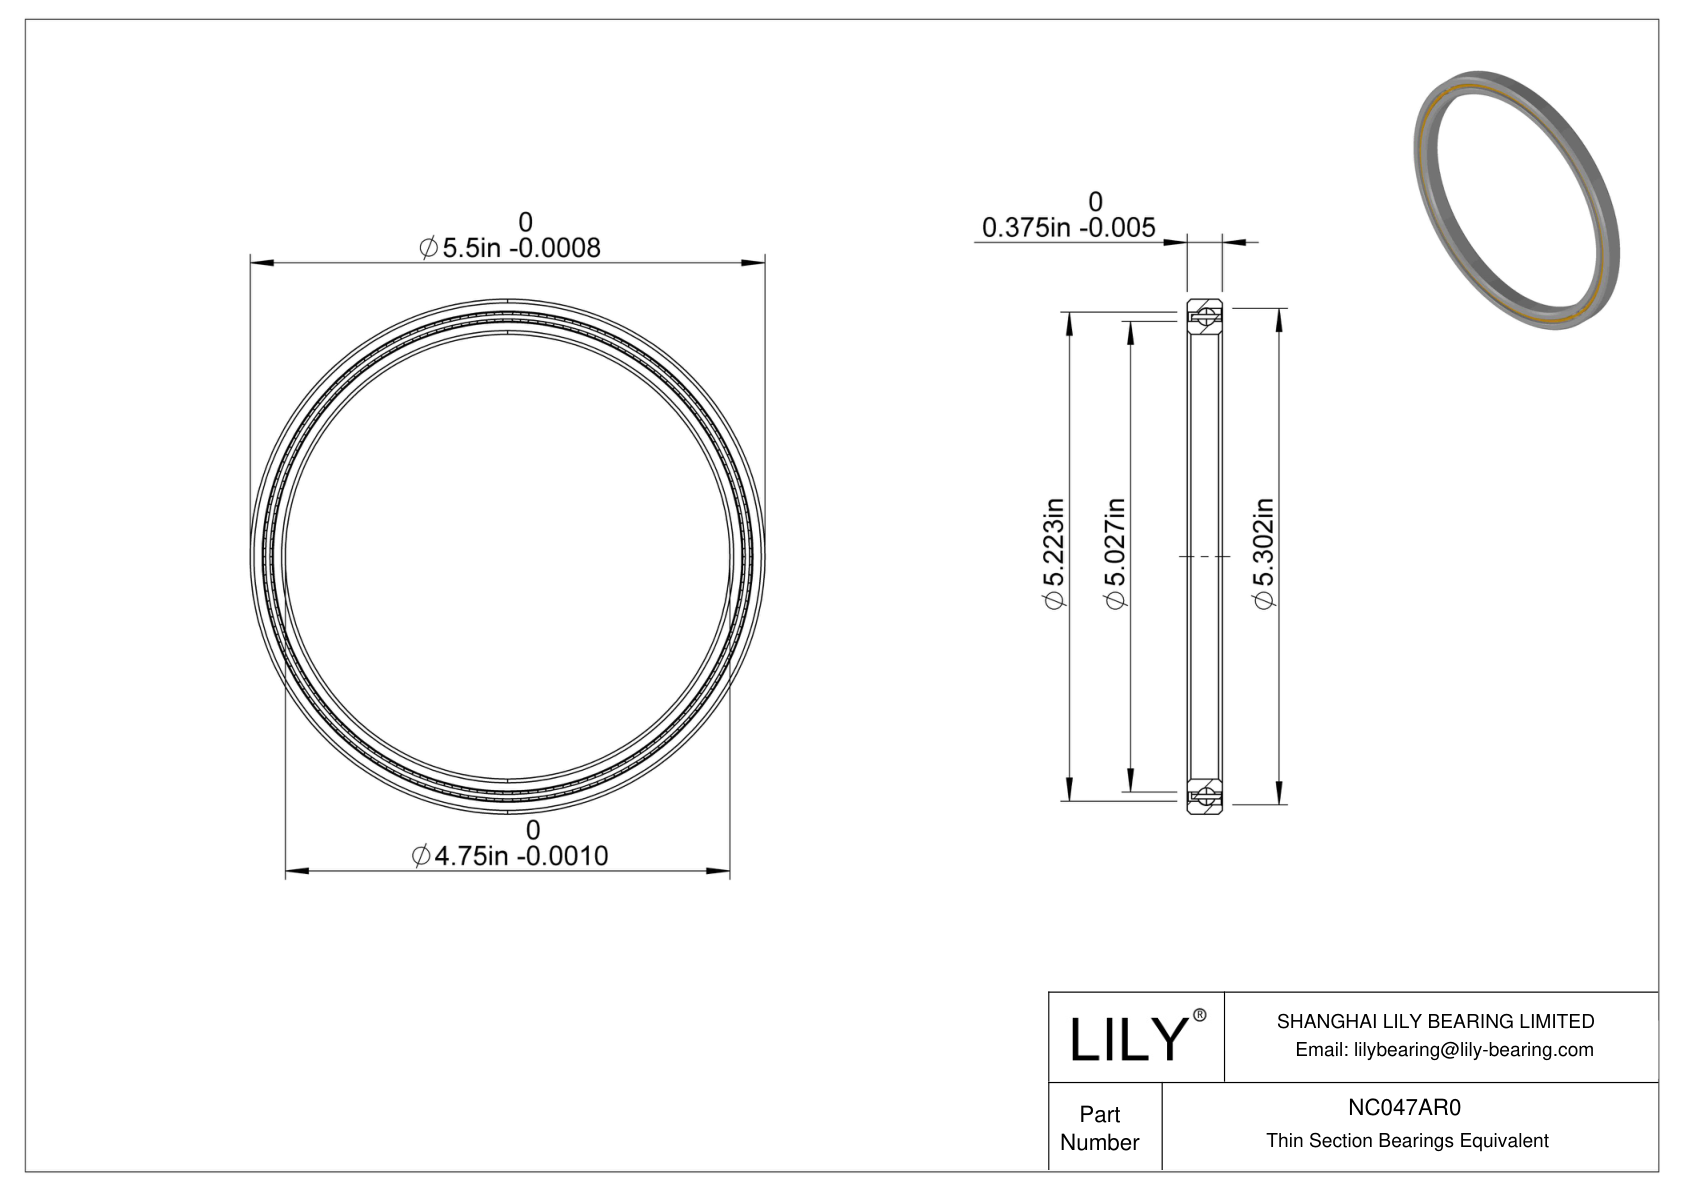 NC047AR0 Constant Section (CS) Bearings cad drawing